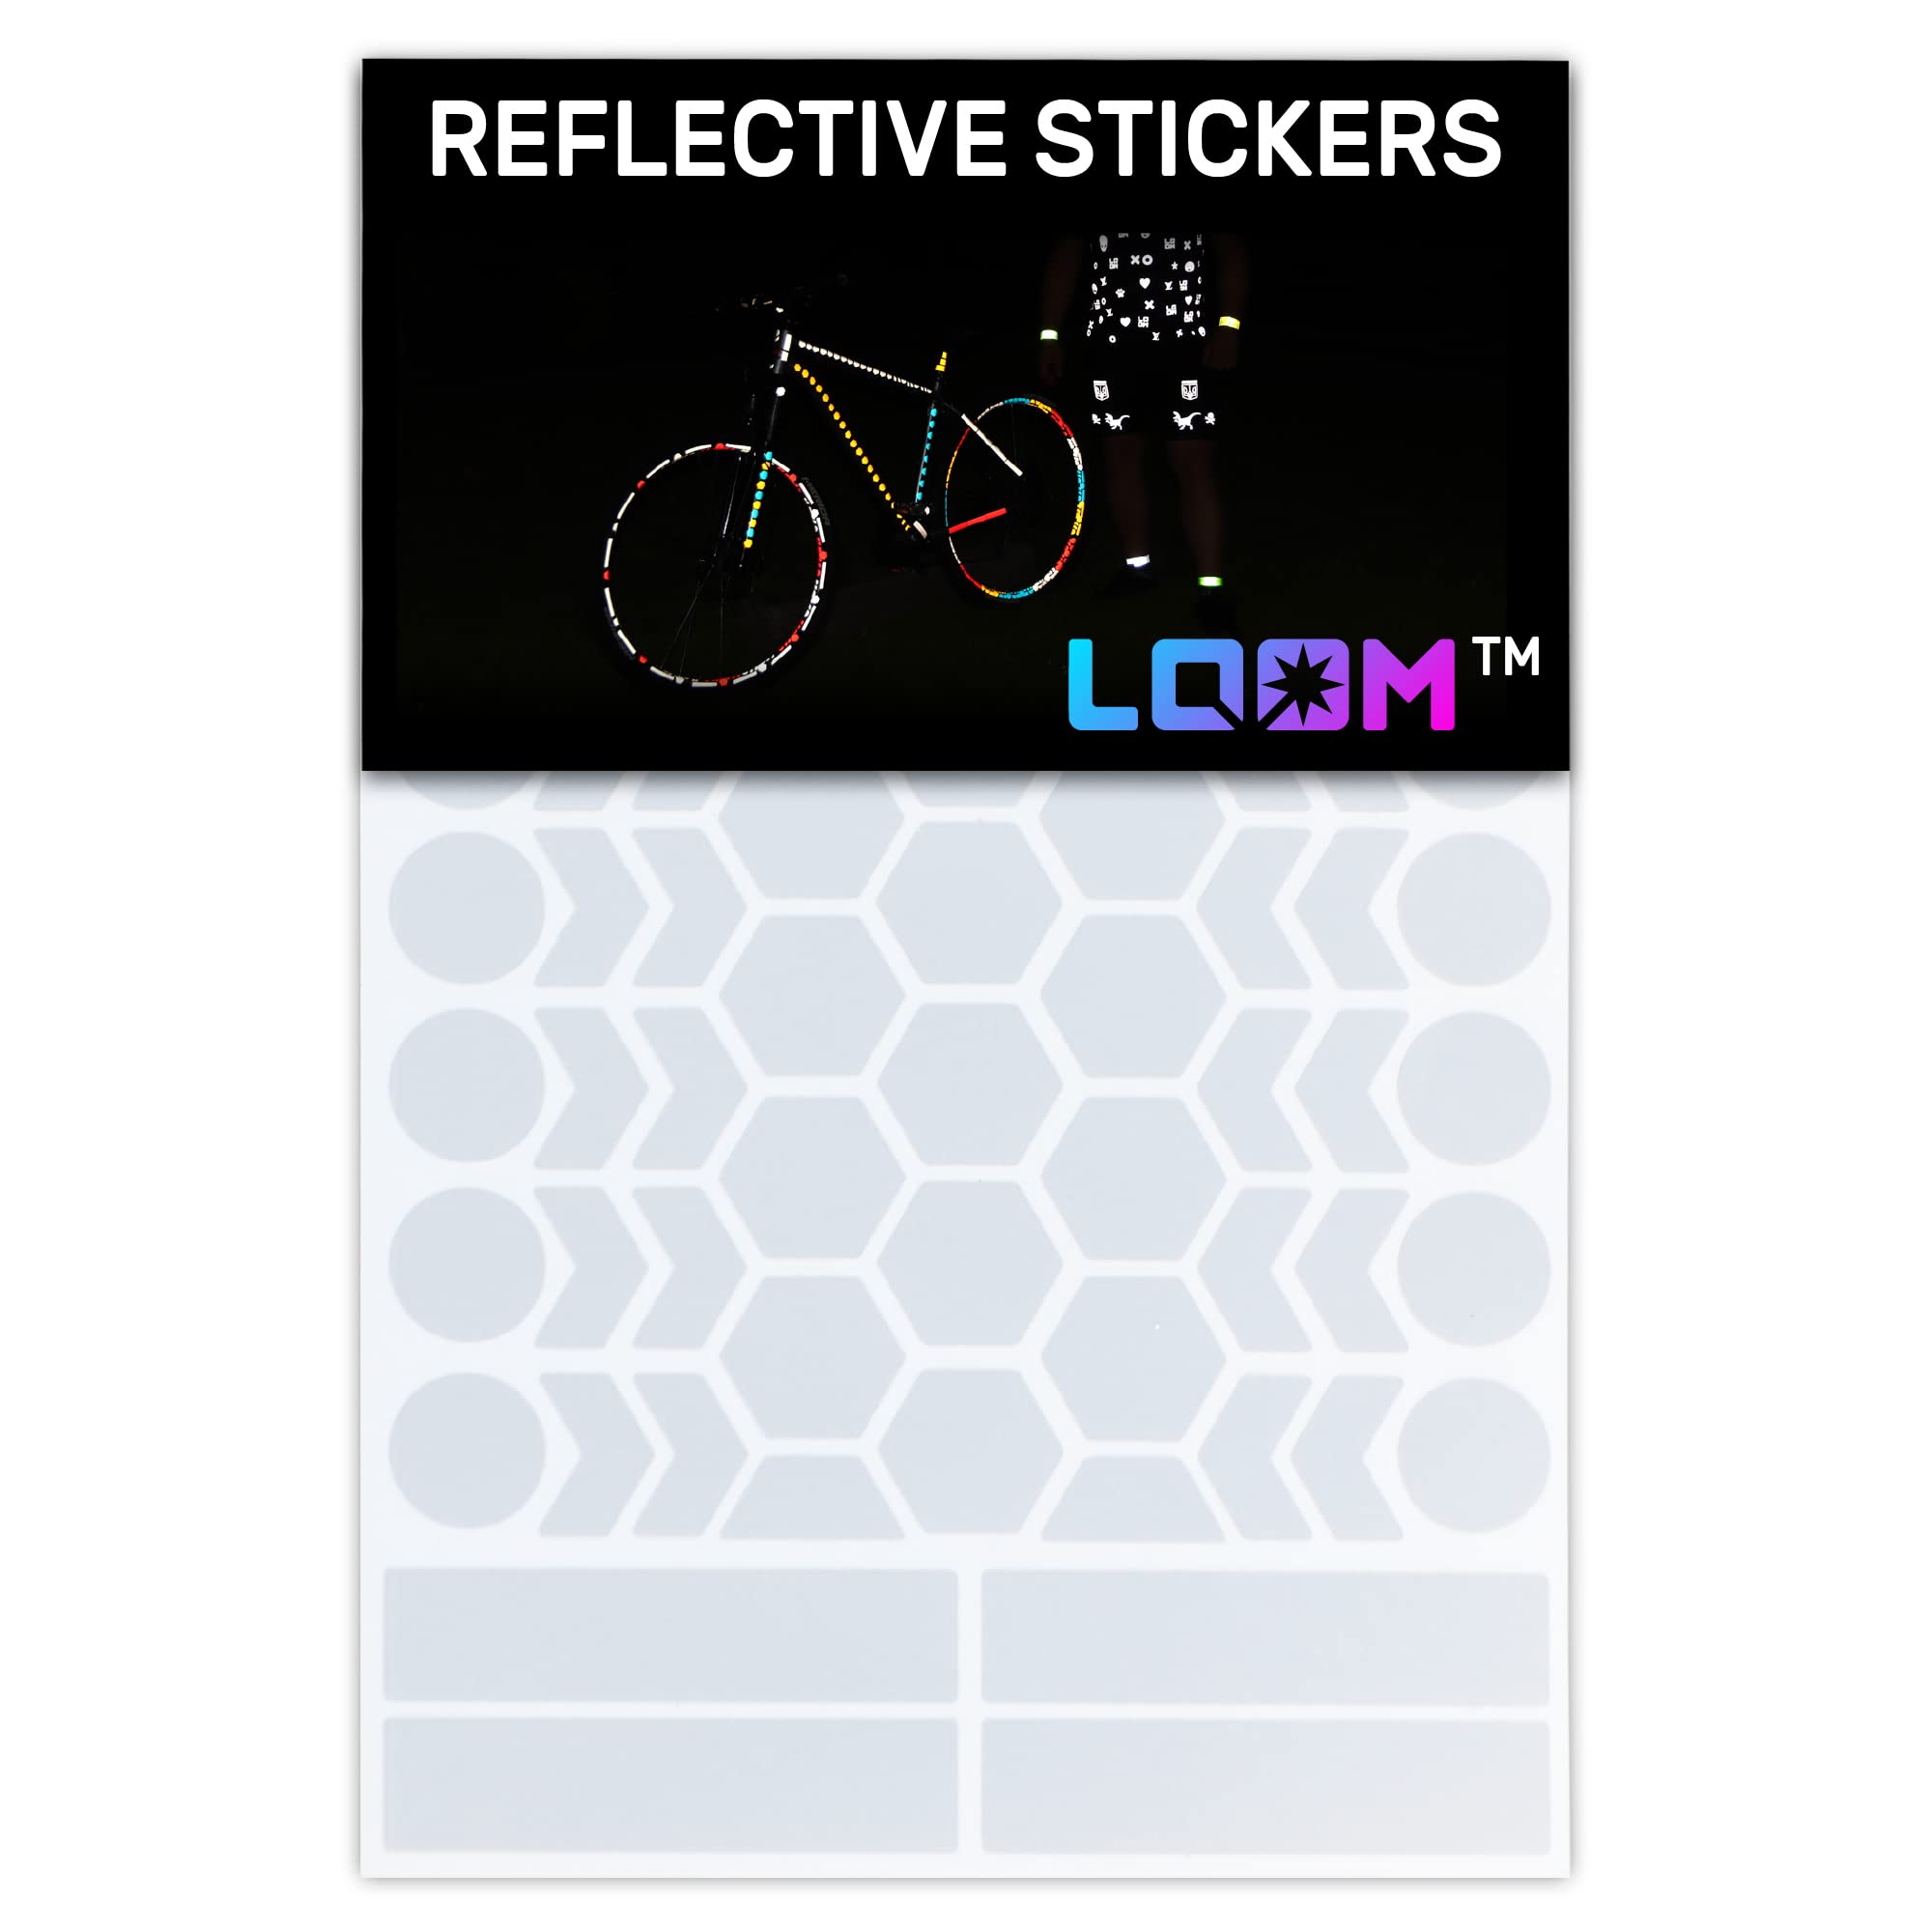 Reflective Stickers Kit (67pcs Grey), Self-Adhesive Bike Decals for  Nighttime Safety, Reflective Sticker for Helmet, Motorcycle, Bicycle, Car  & Stroller